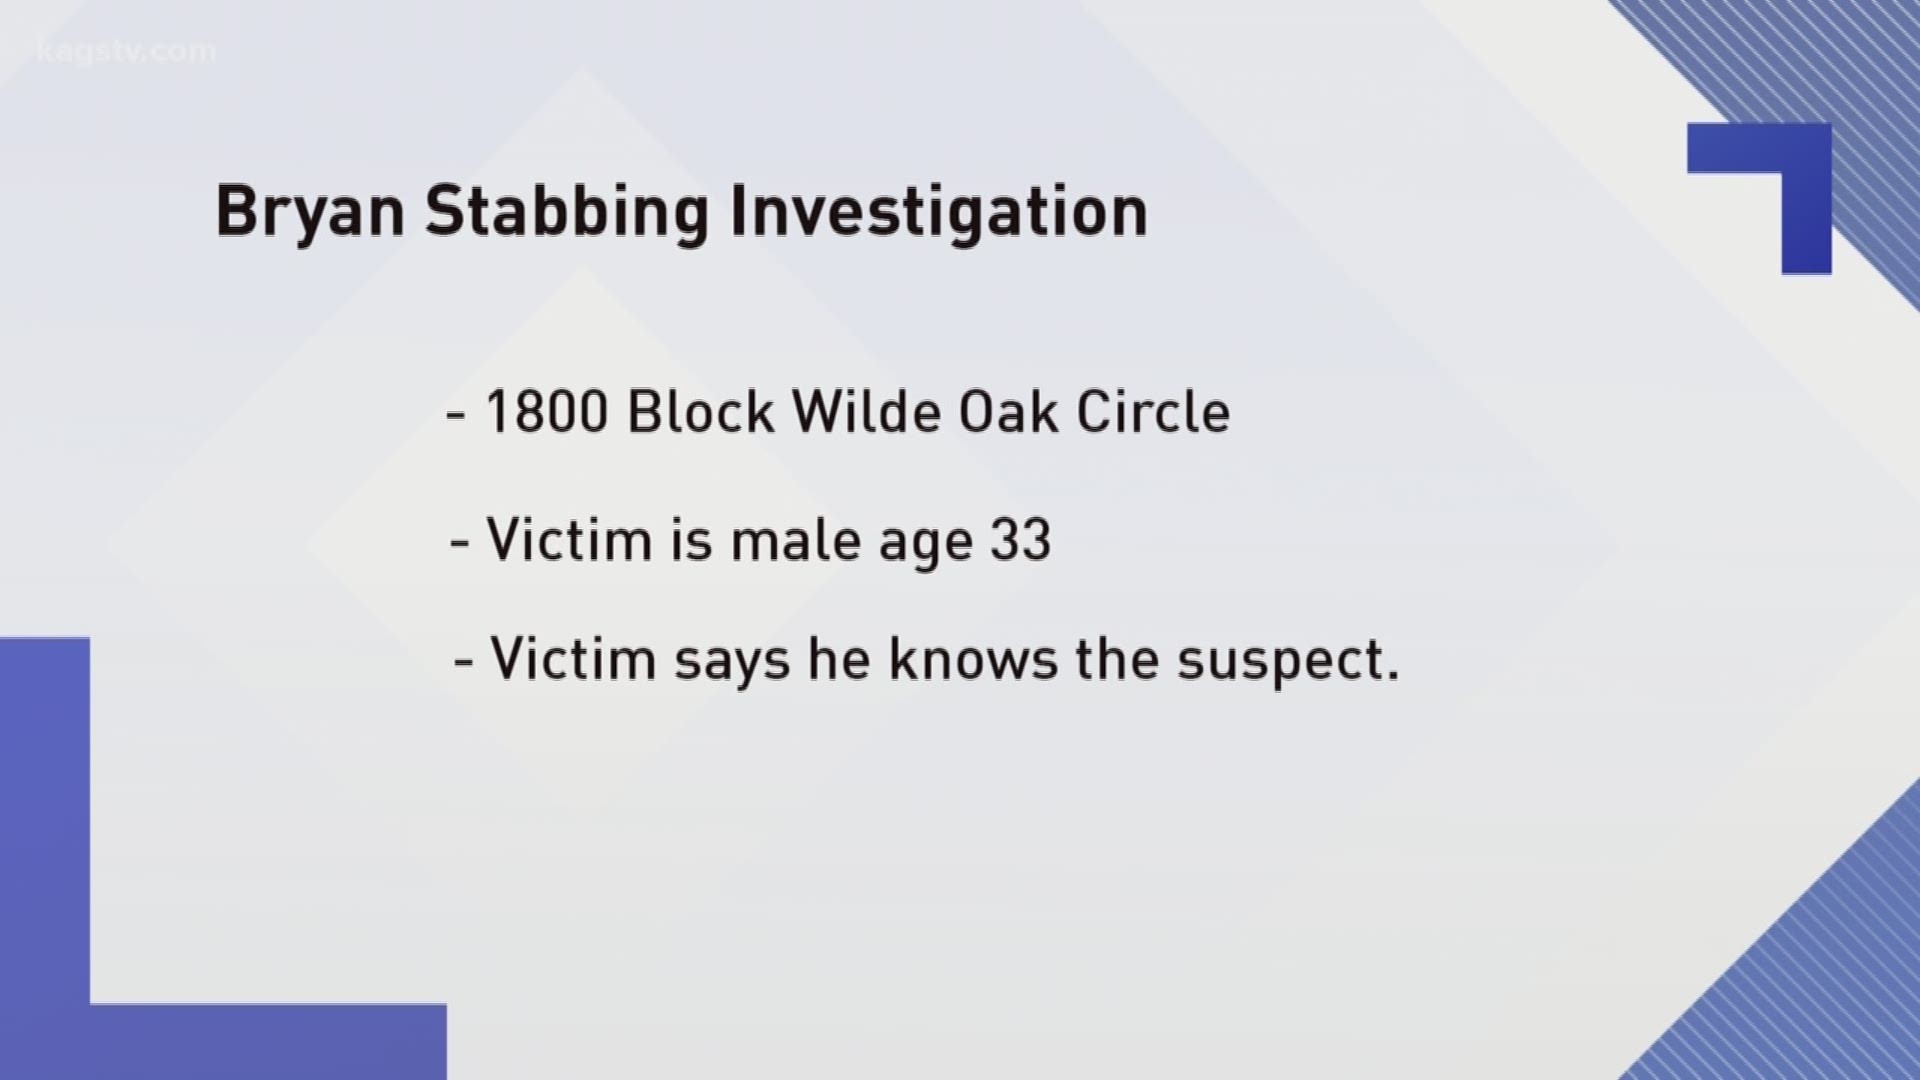 The victim tool himself to the hospital and was later released.